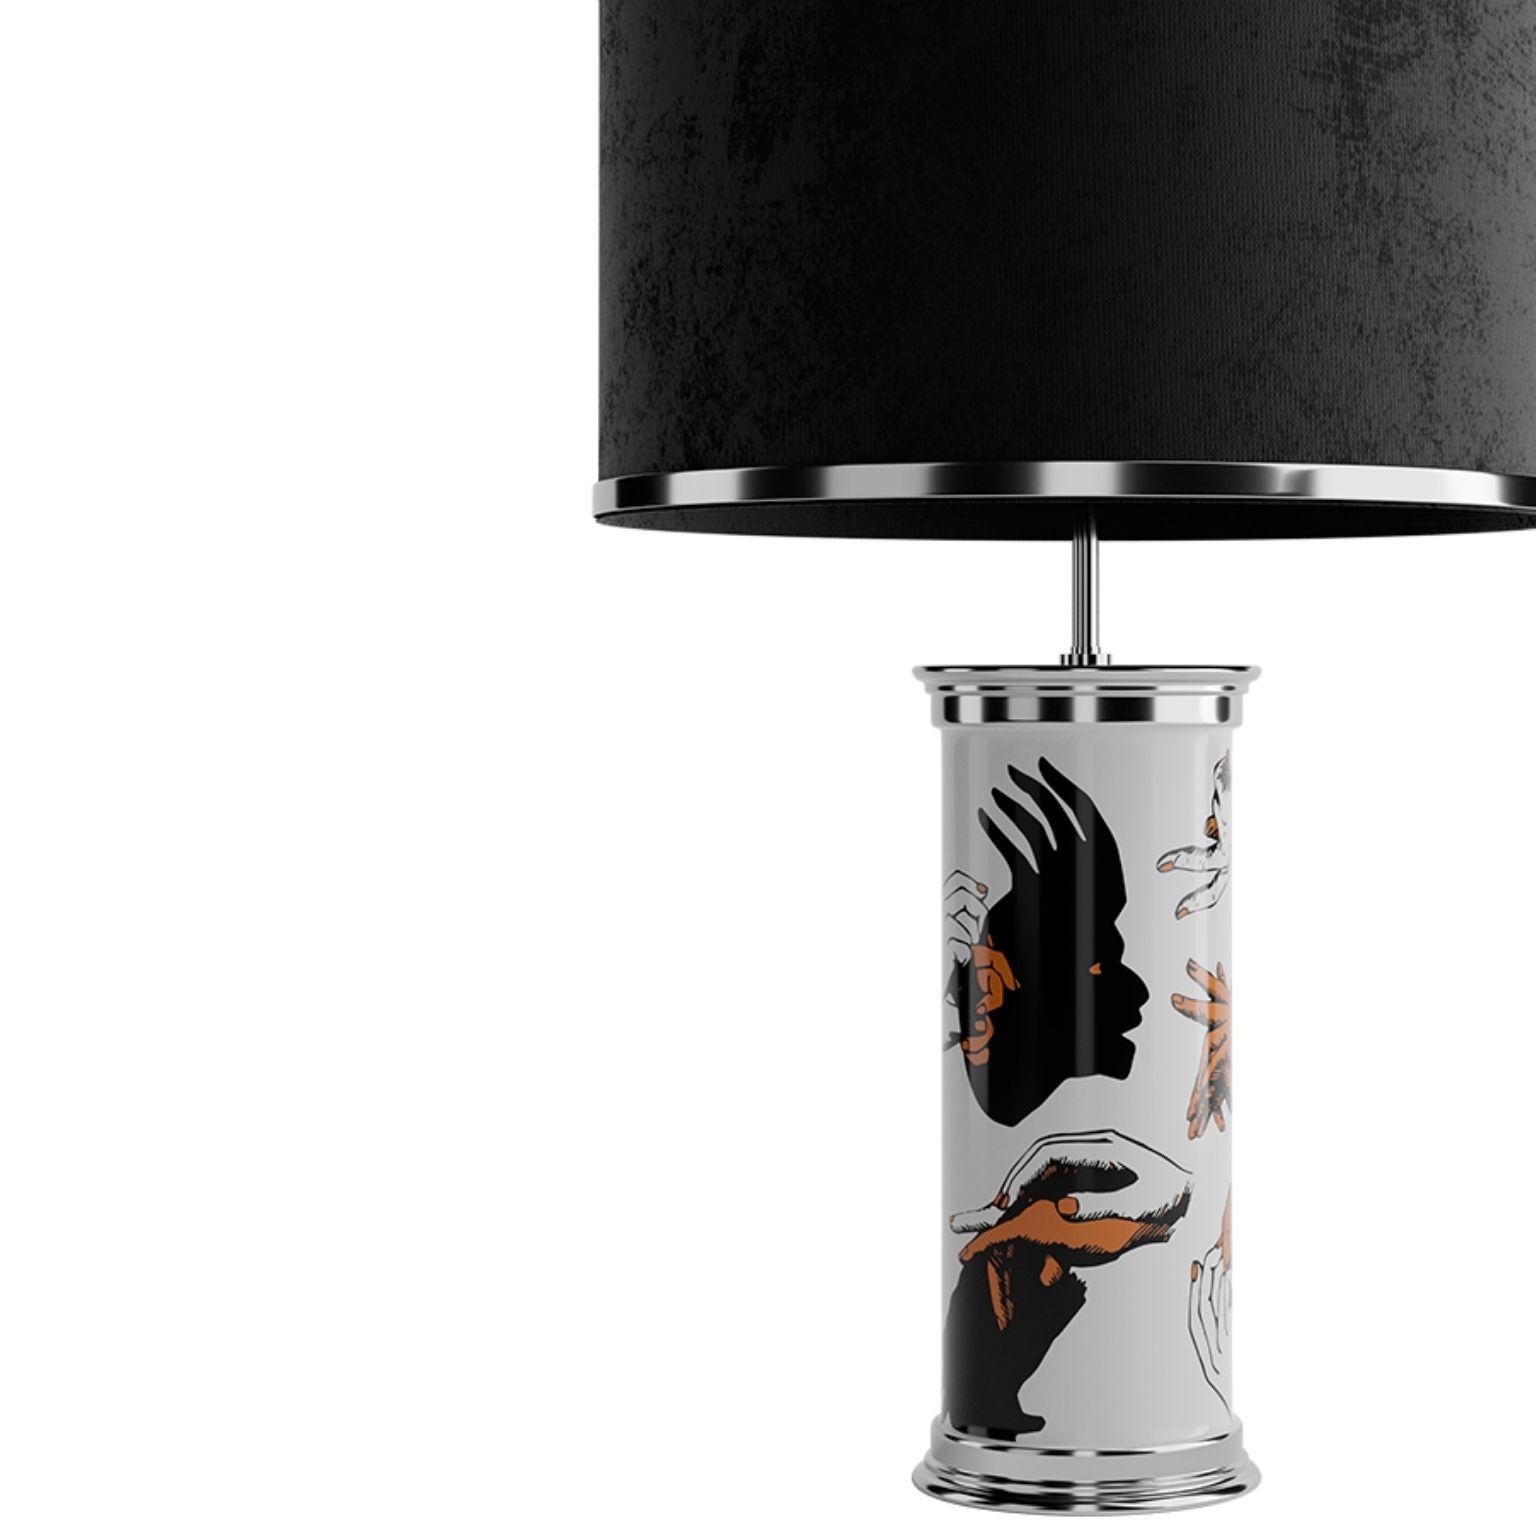 Hand-painted Union Table Lamp, Design and Art in a Handmade Lighting Piece

Union table lamp is a match of personality for all design and art lovers. The hand-painted base arises to personify a cultural and aesthetic play shadow performance; it